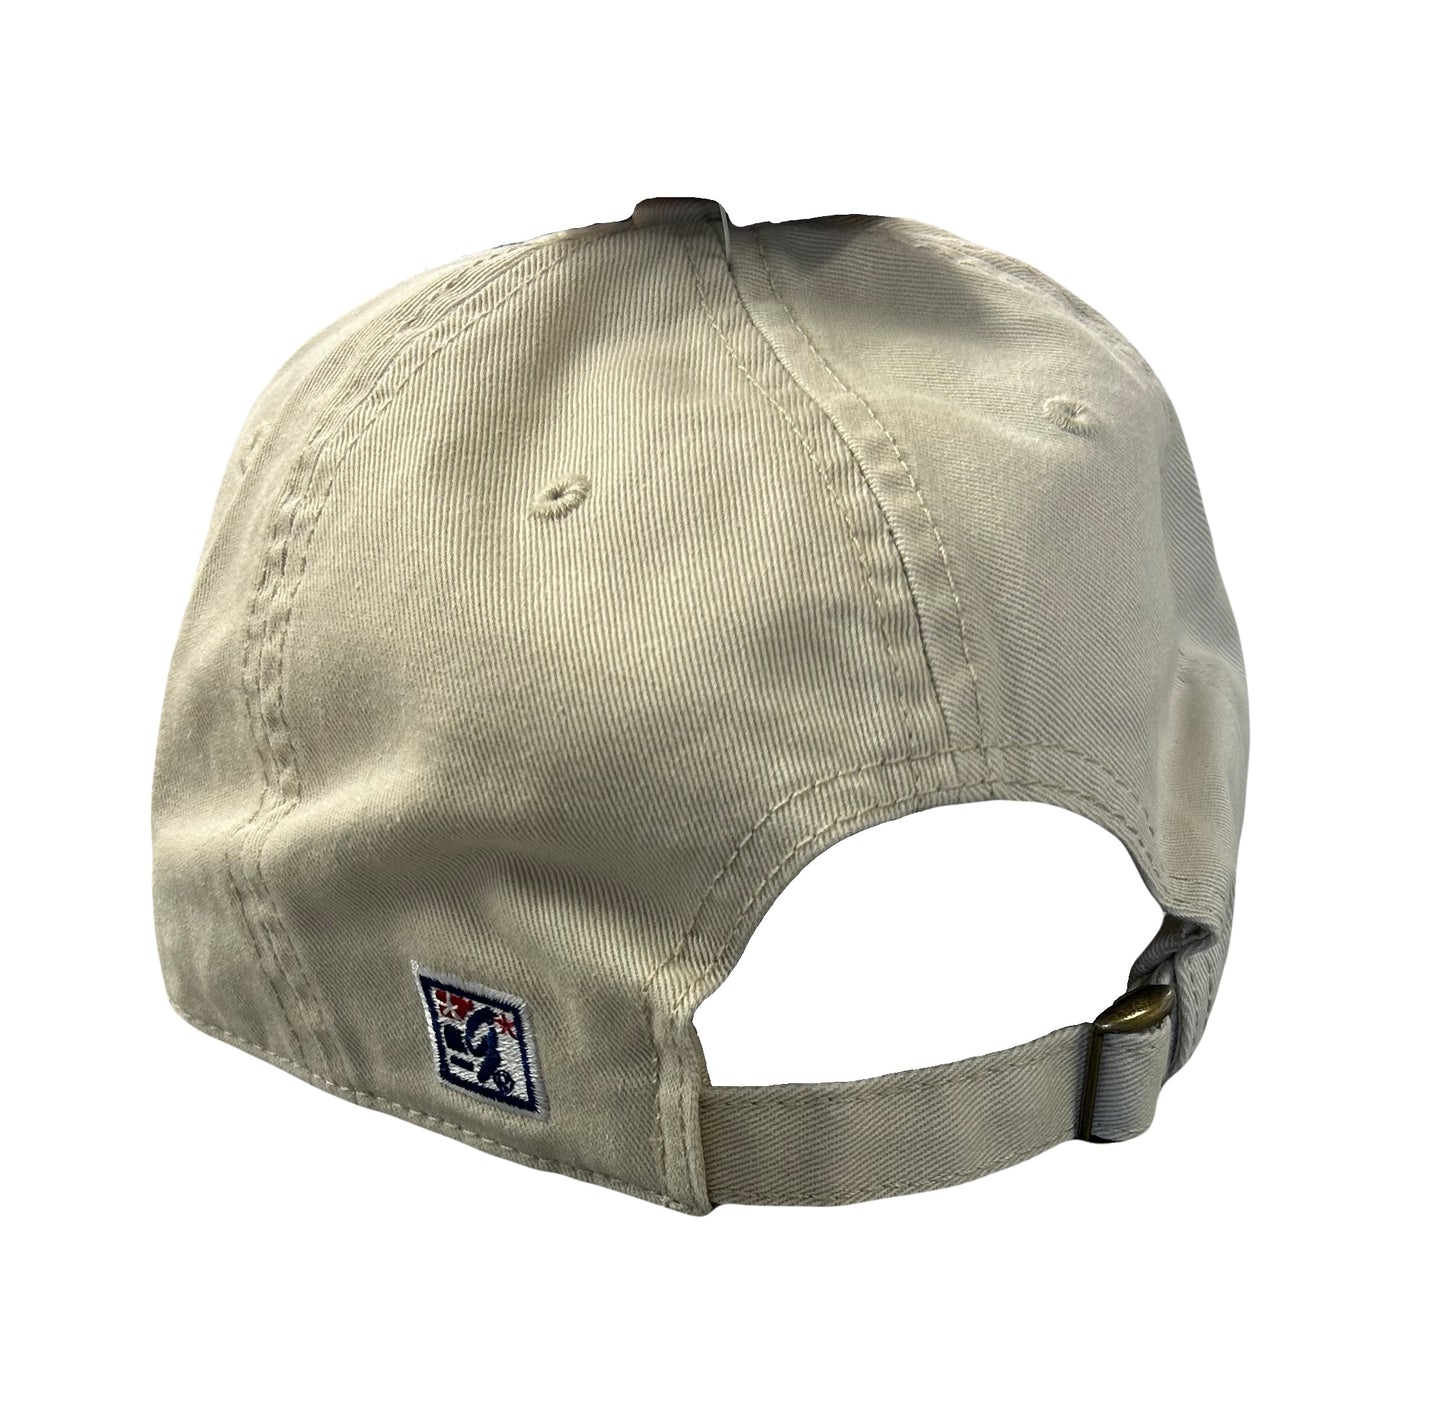 Classic Relaxed Twill Hat - Stone SUNY Poly